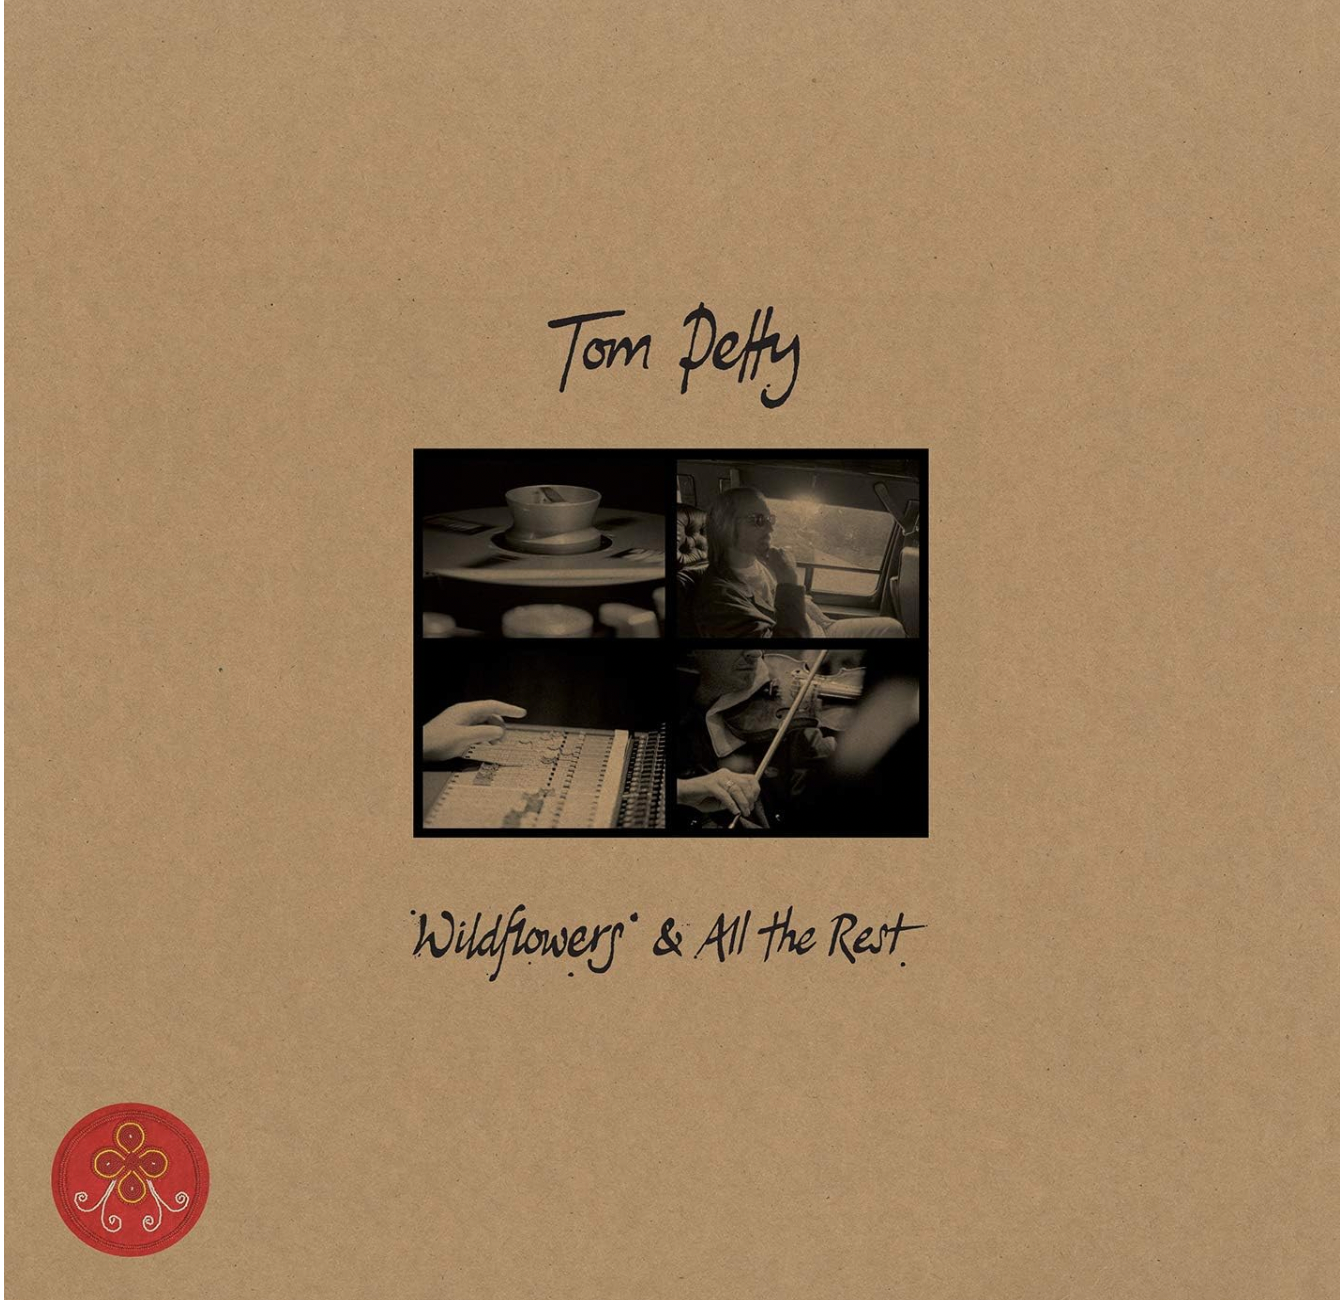 PETTY, TOM - WILDFLOWERS & ALL THE REST 3LP